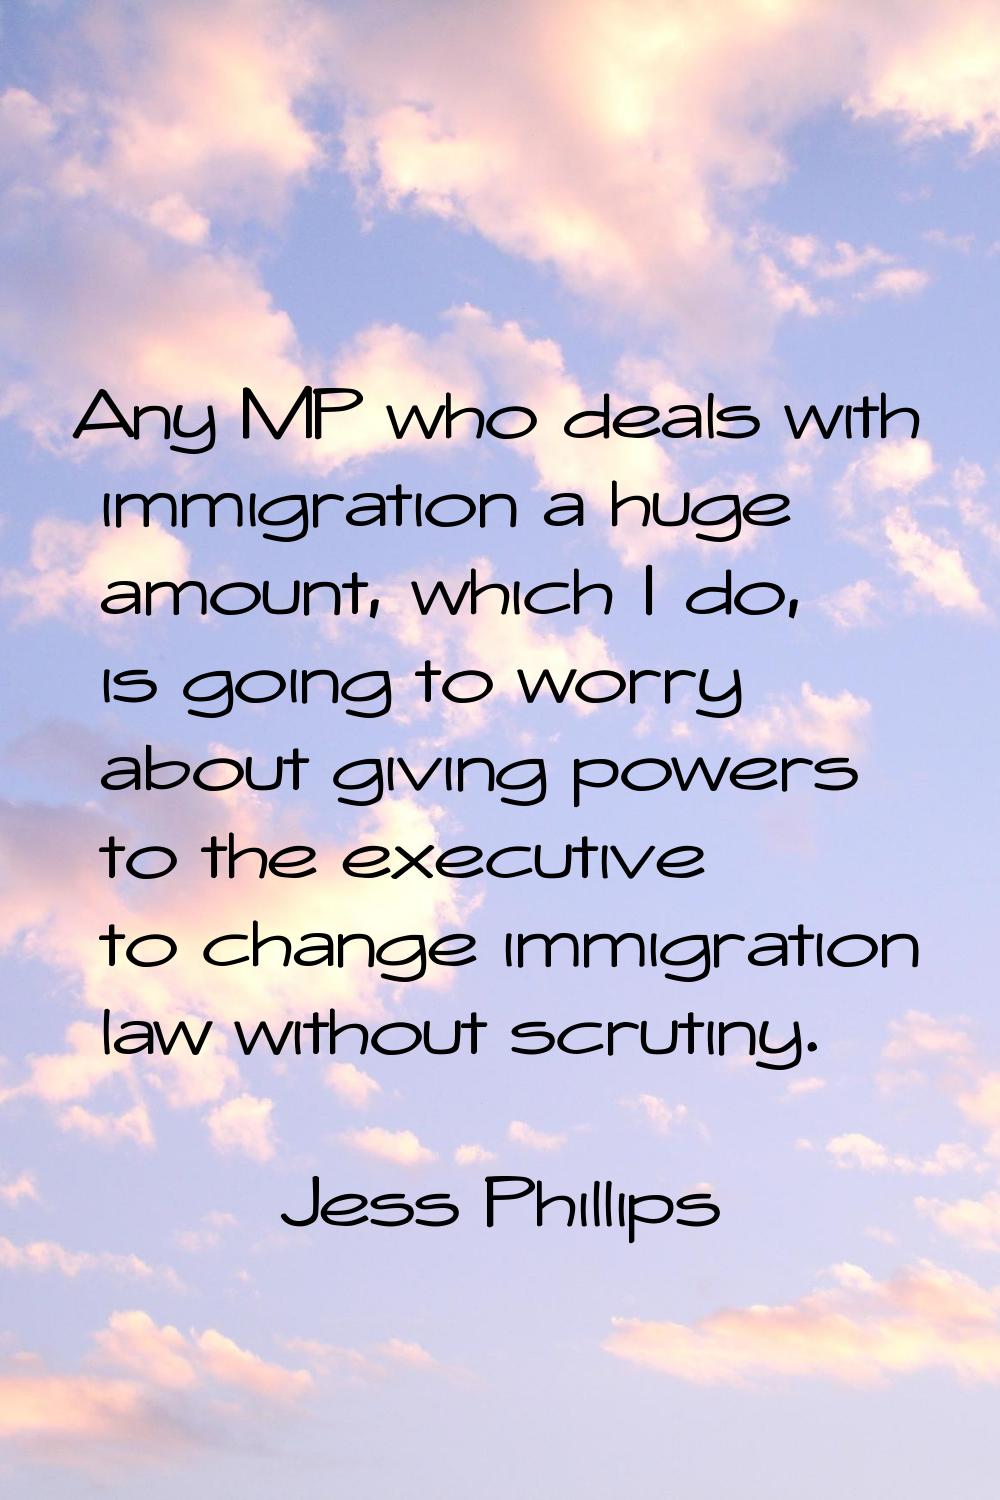 Any MP who deals with immigration a huge amount, which I do, is going to worry about giving powers 